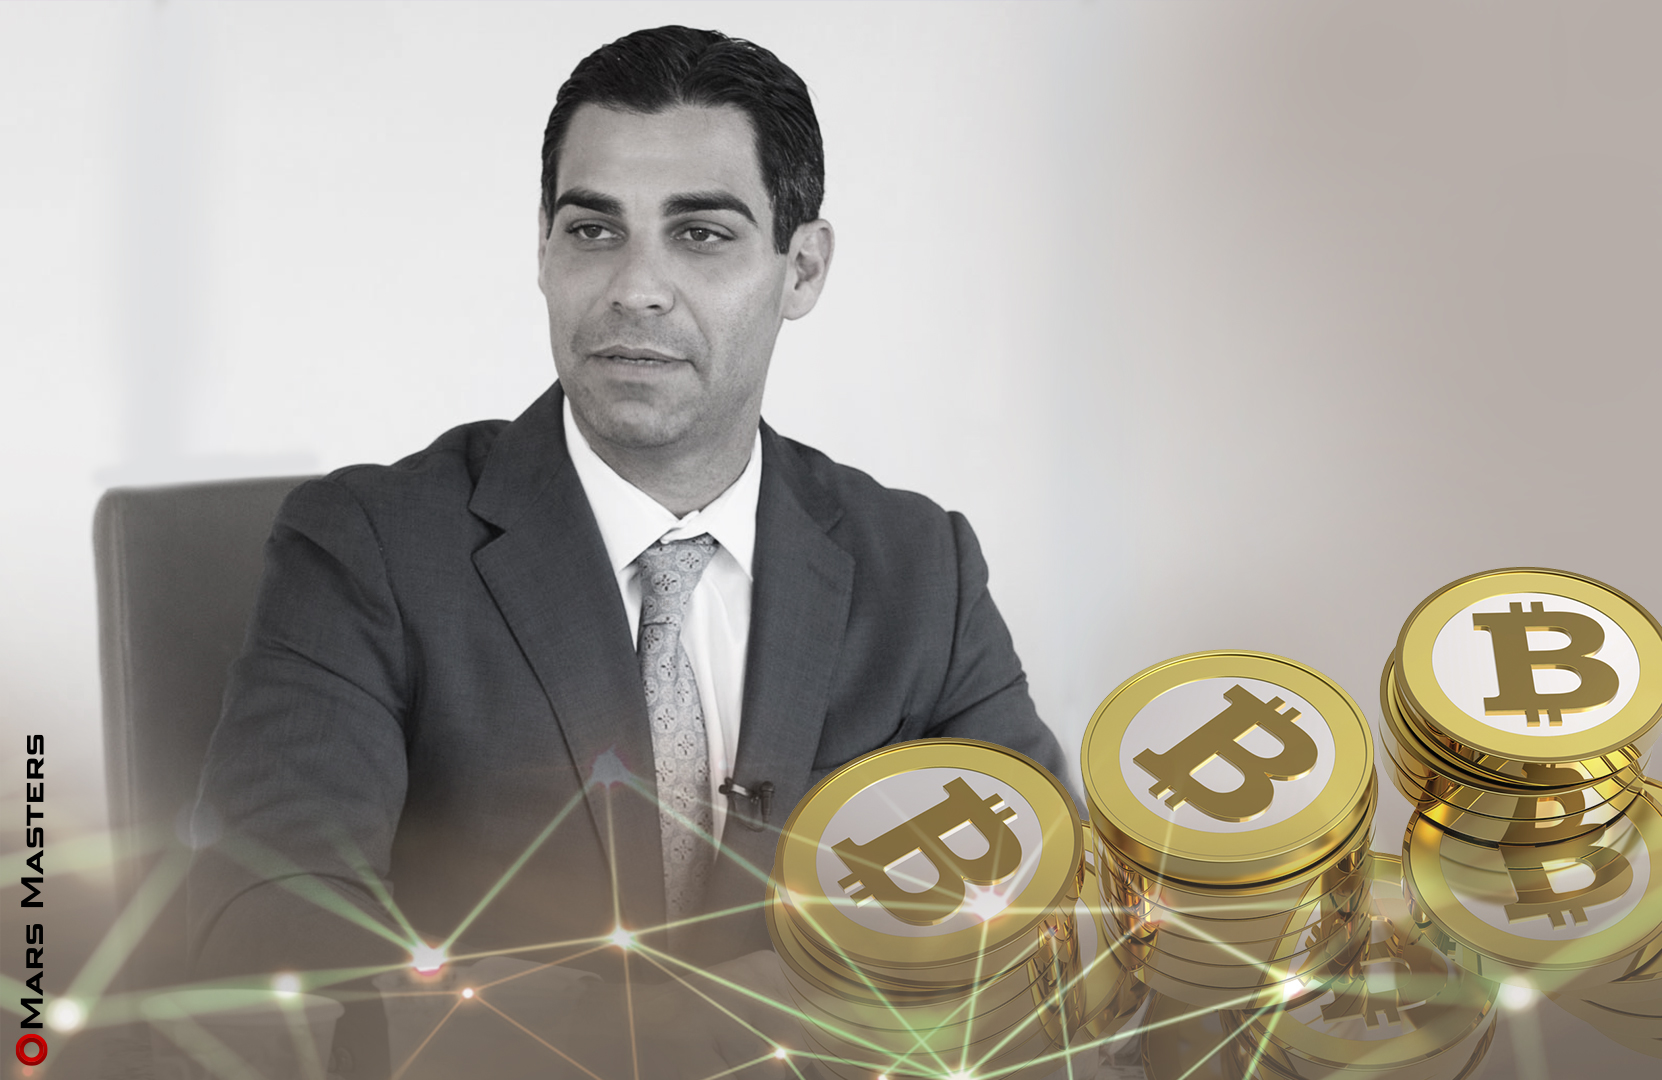 Miami Mayor Is Open to Bitcoin Investment